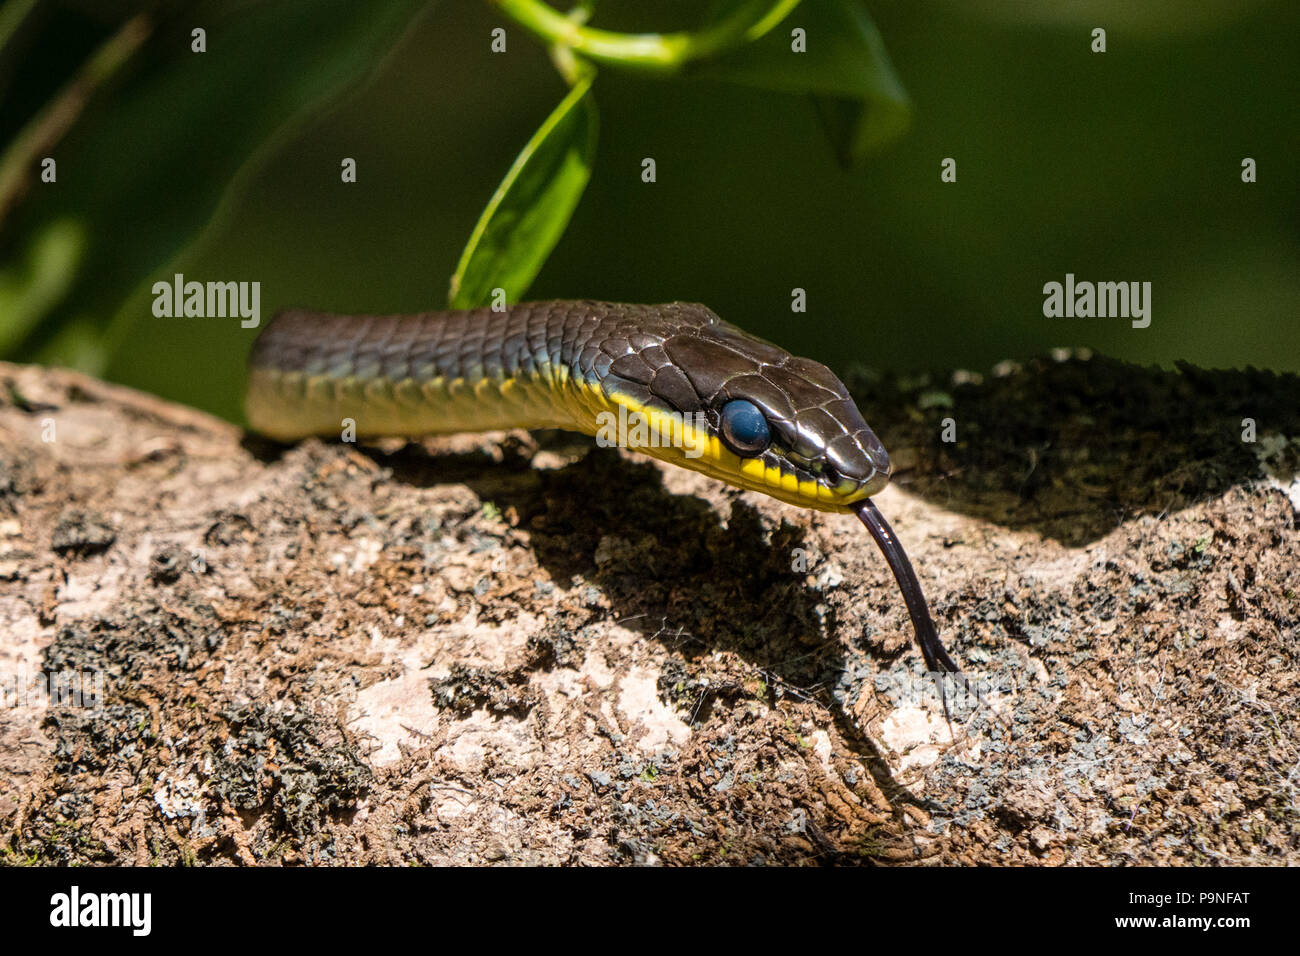 The forked tongue of a Green Tree Snake scenting a tree branch for prey. Stock Photo